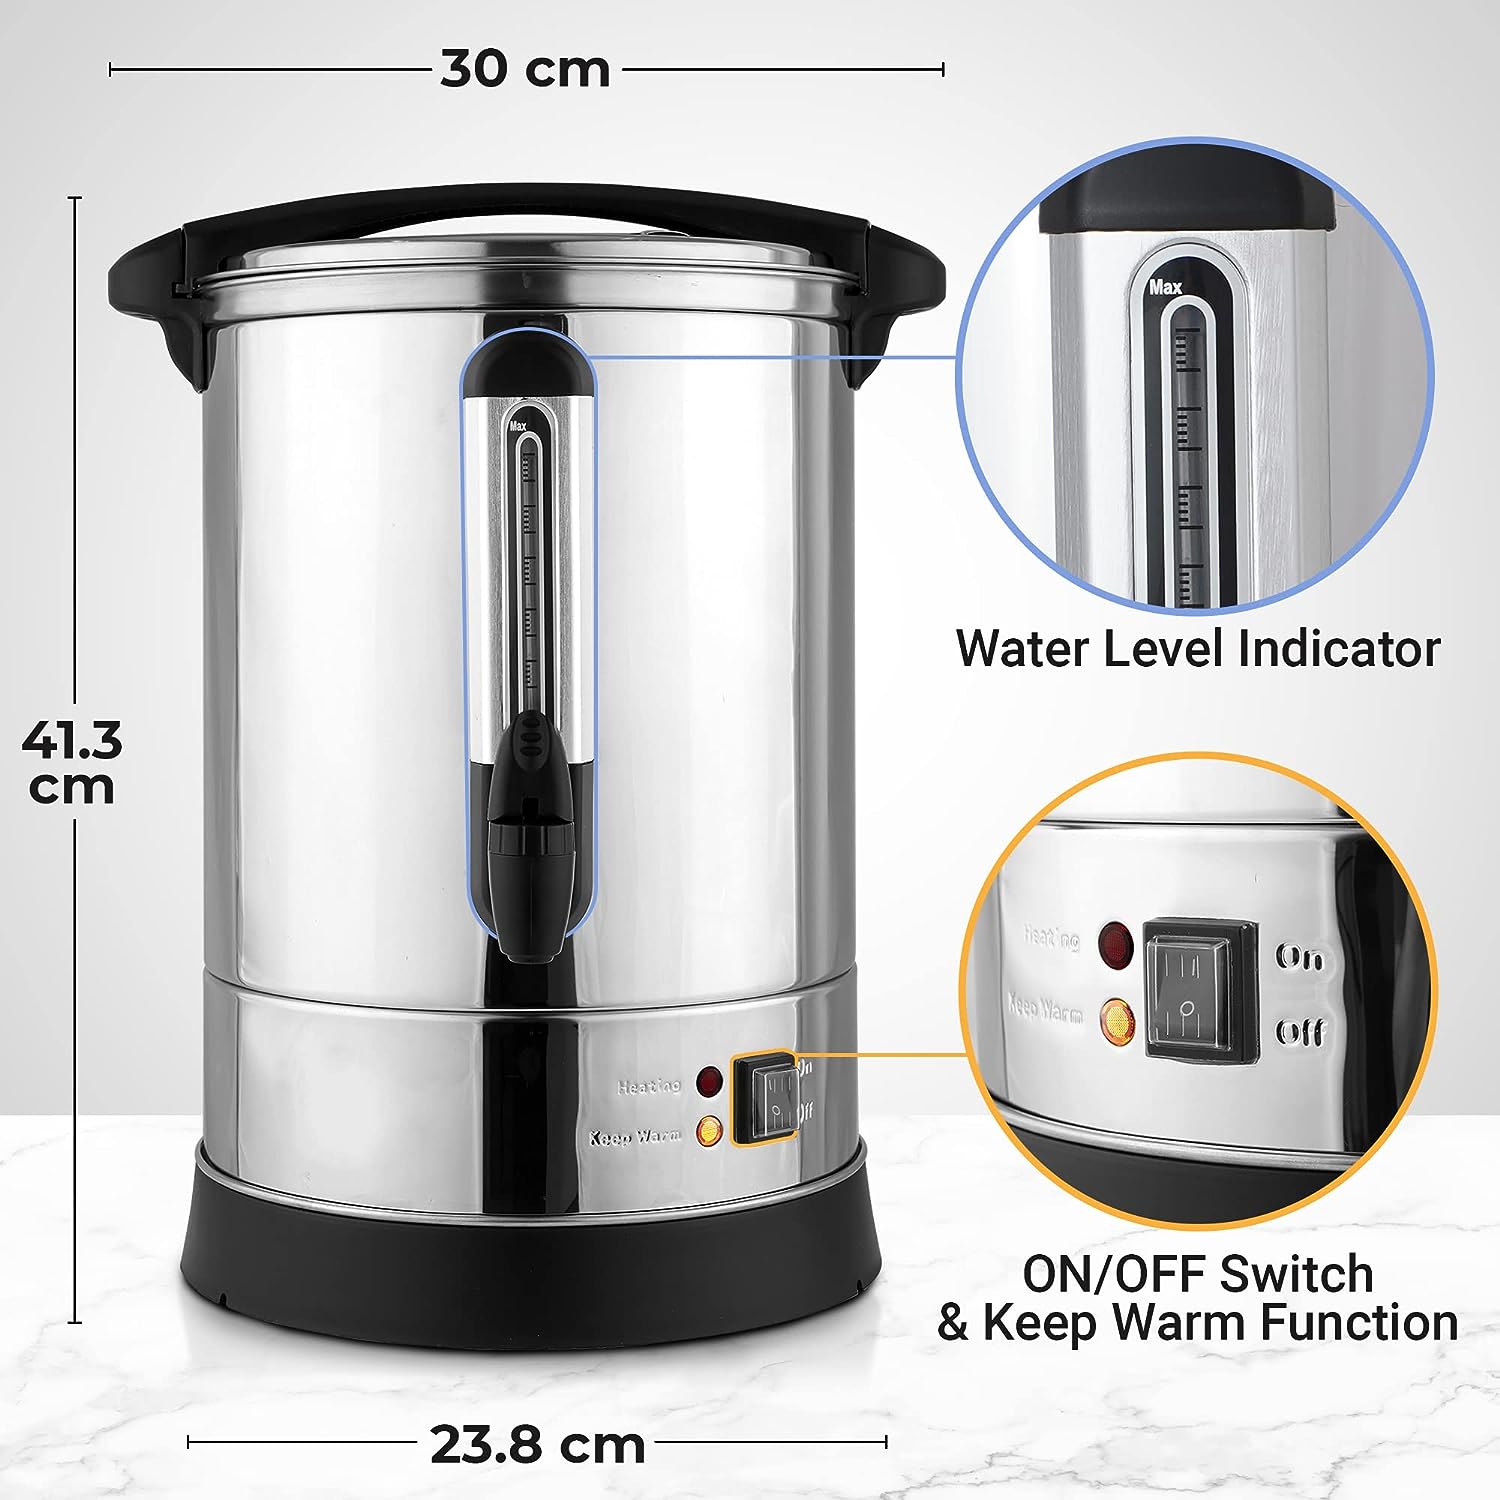 30 Cup Hot Water Urn